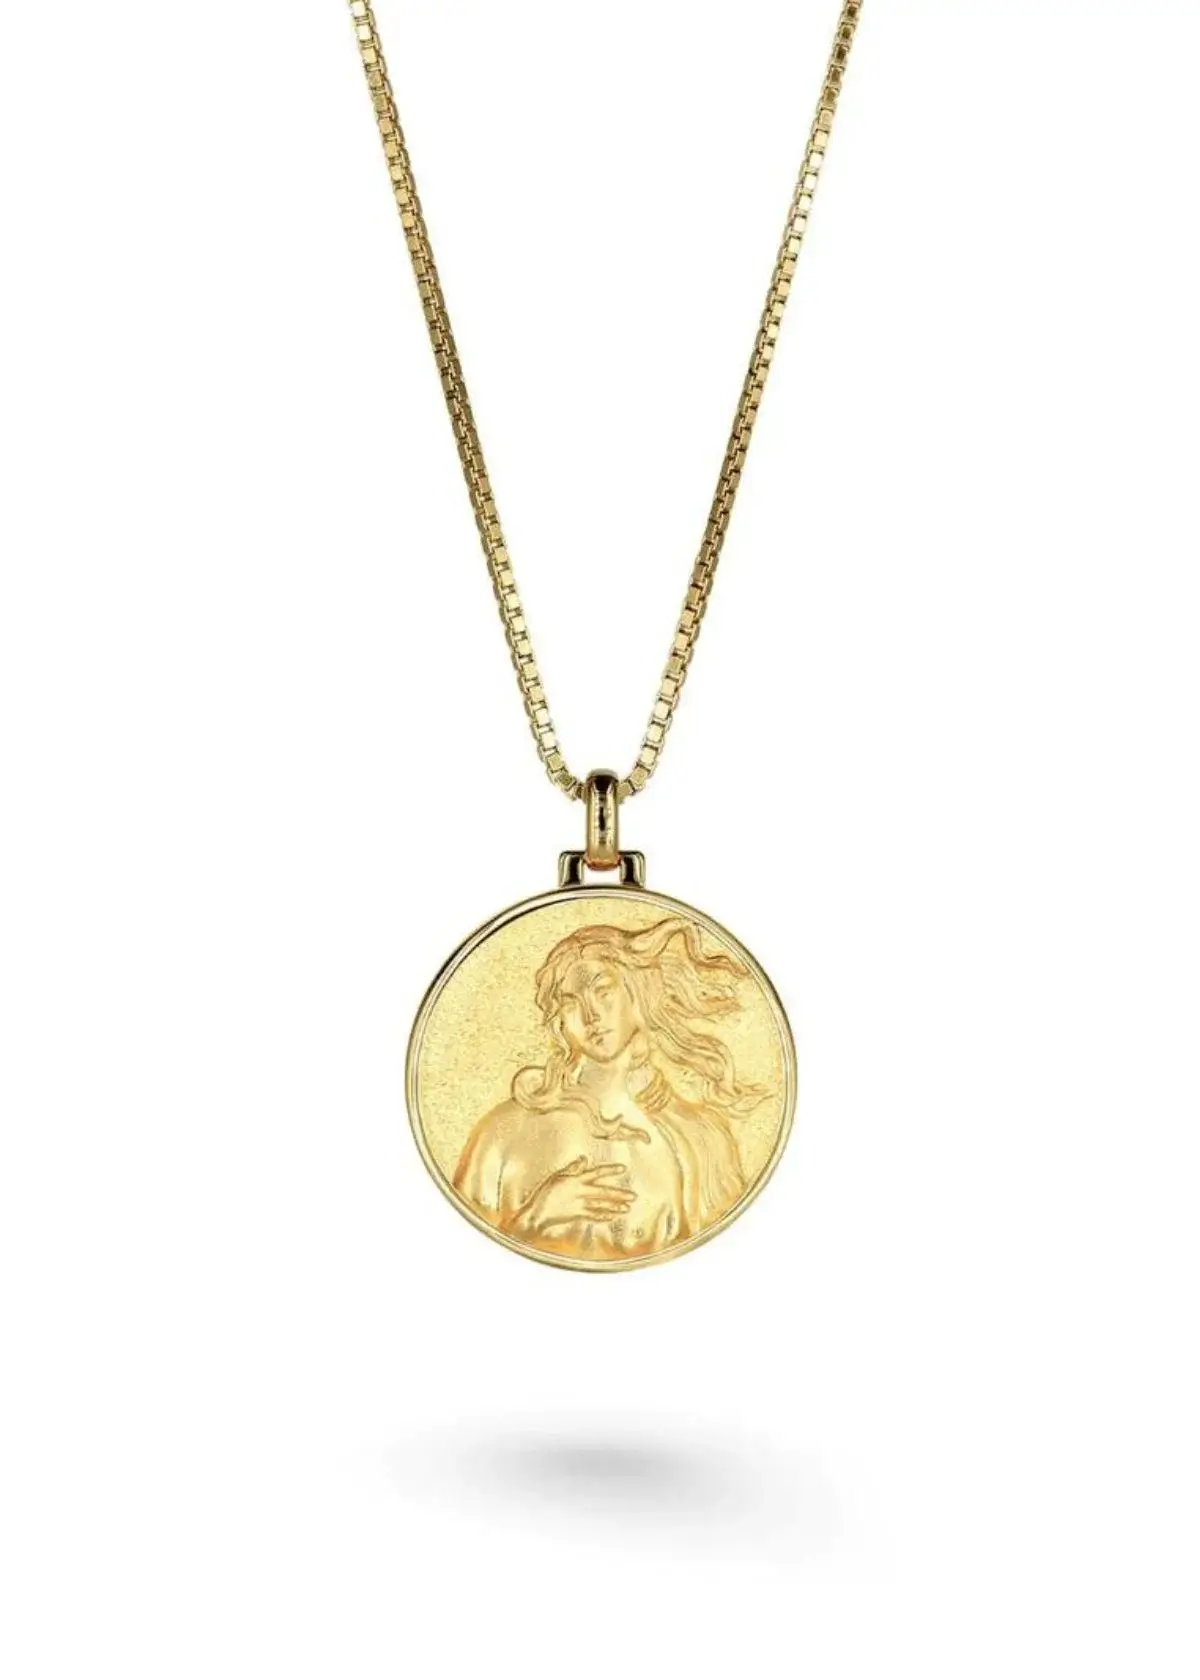 How do I know if my Aphrodite Necklace is Authentic?